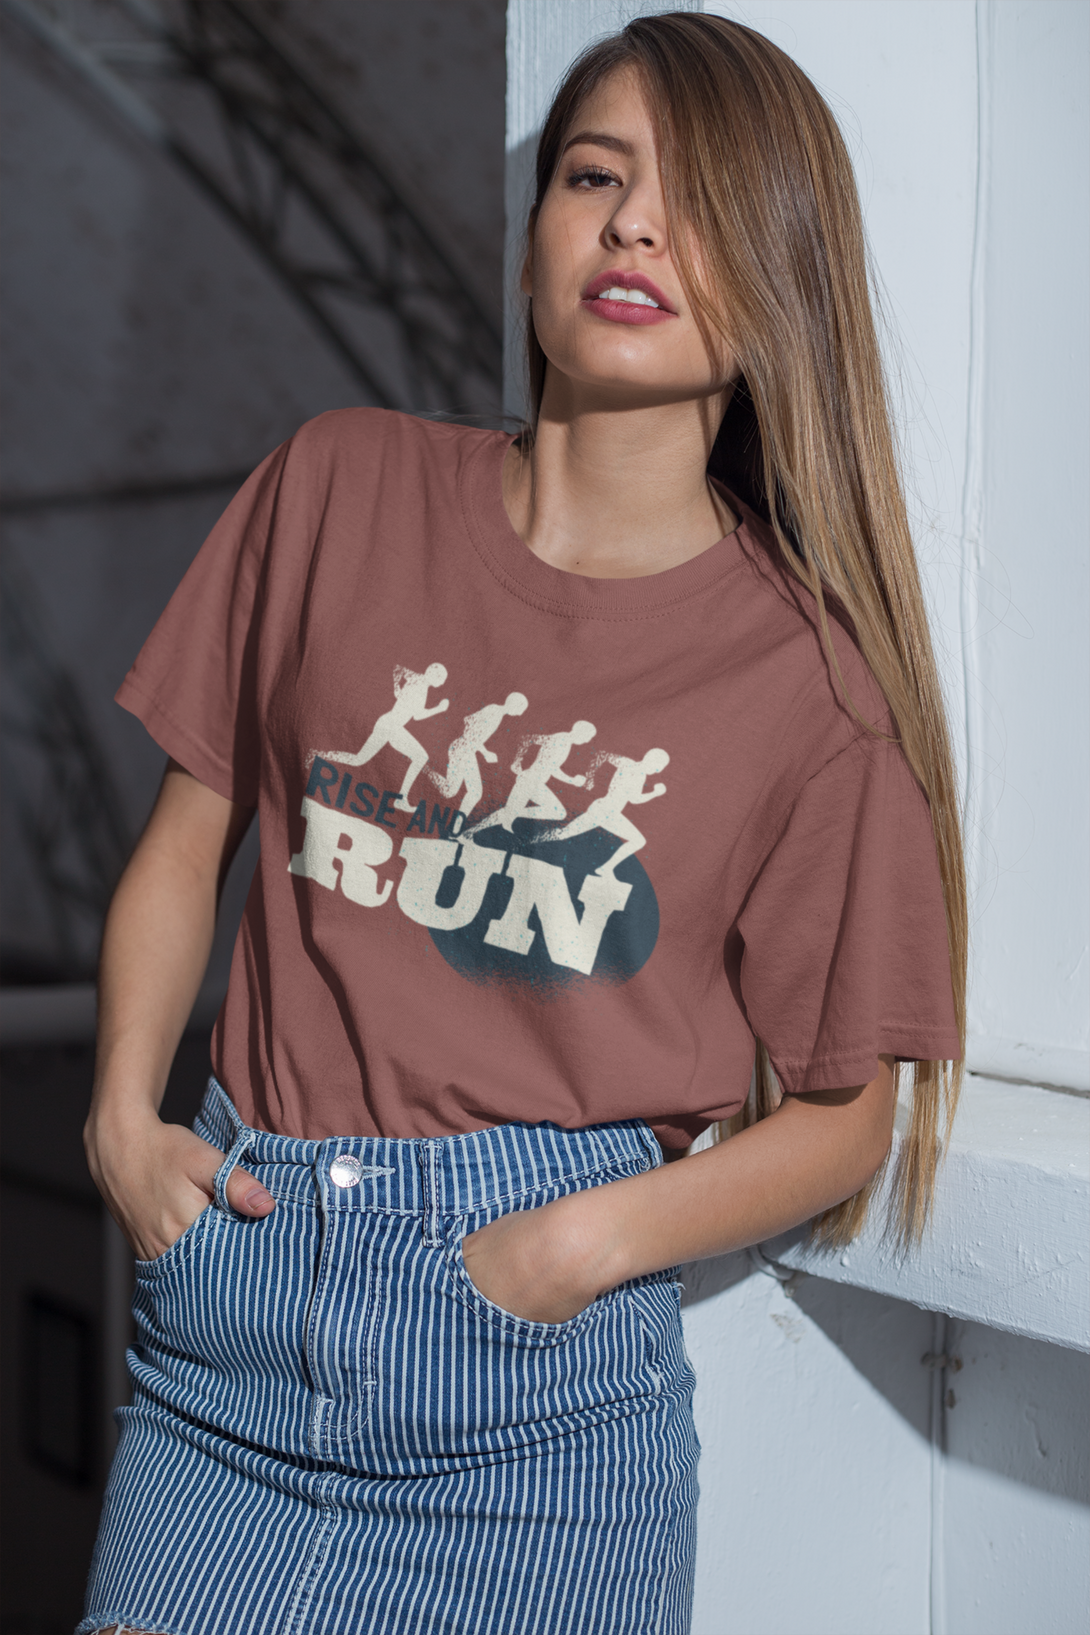 Rise And Run Printed Oversized T-Shirt For Women - WowWaves - 2